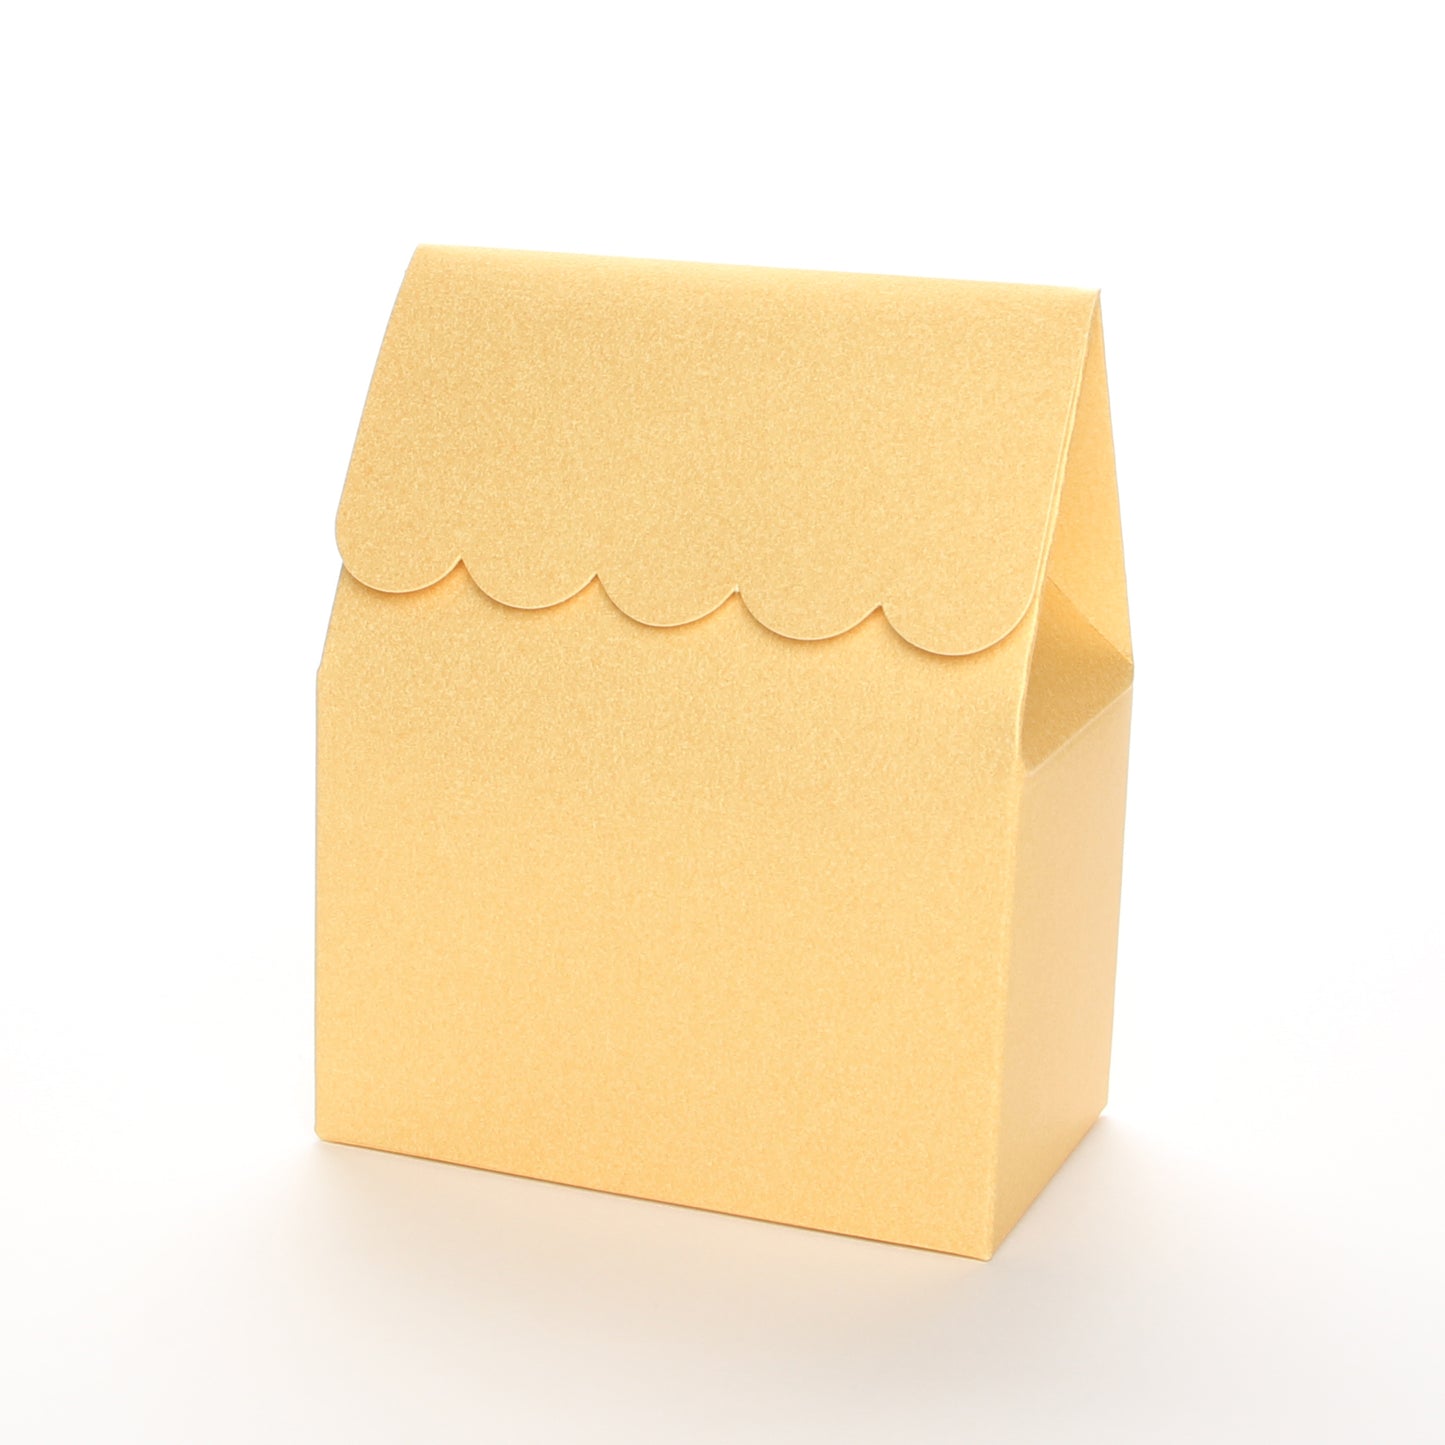 Gold favor box by Lux Party with a scalloped edge on a white background.